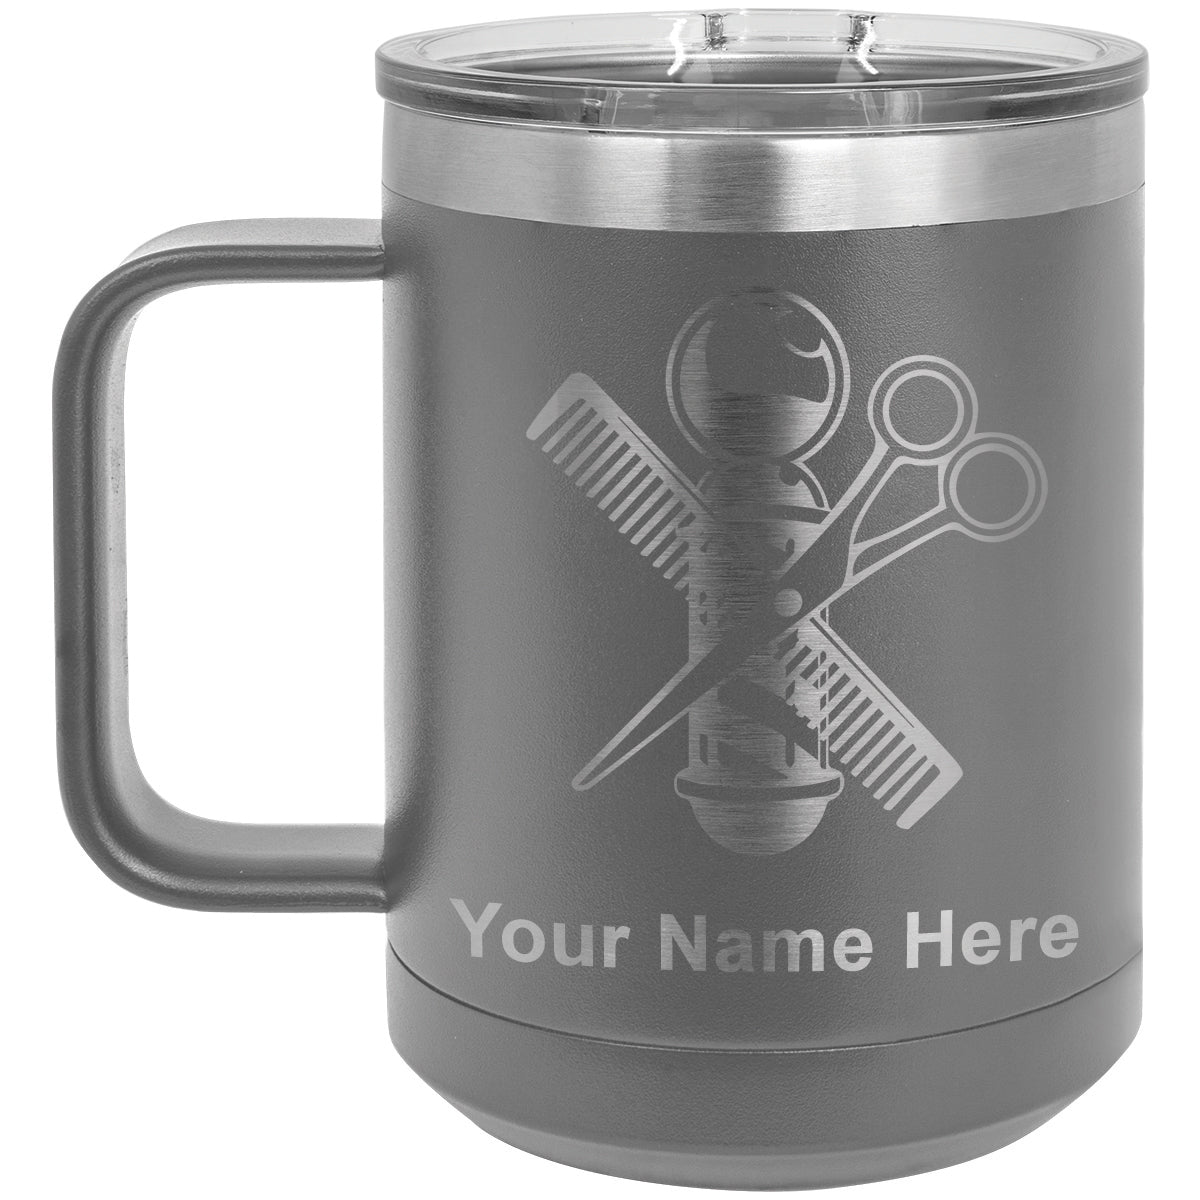 15oz Vacuum Insulated Coffee Mug, Barber Shop Pole, Personalized Engraving Included